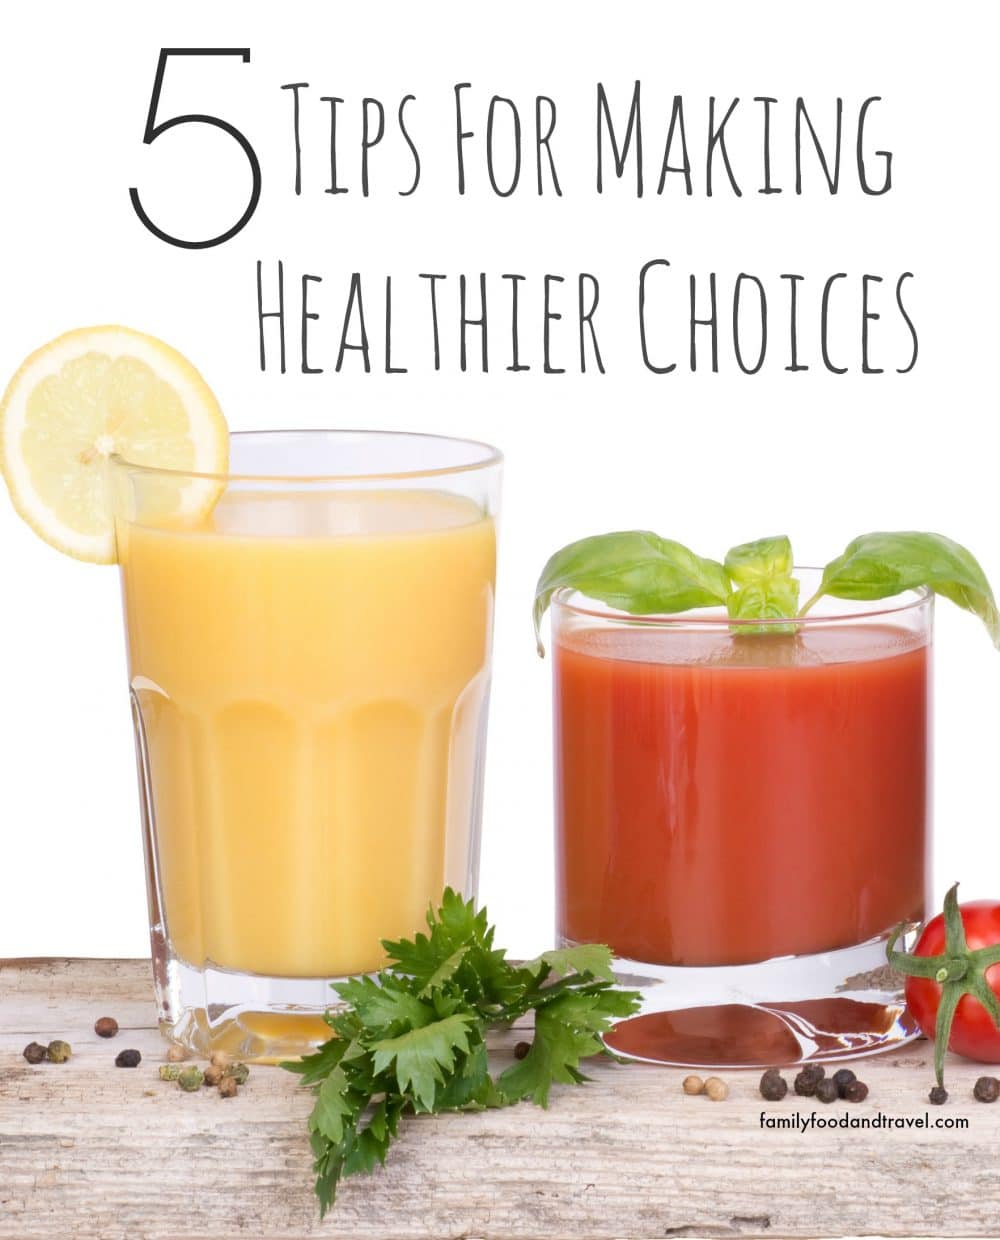 Tips For Making Healthier Choices